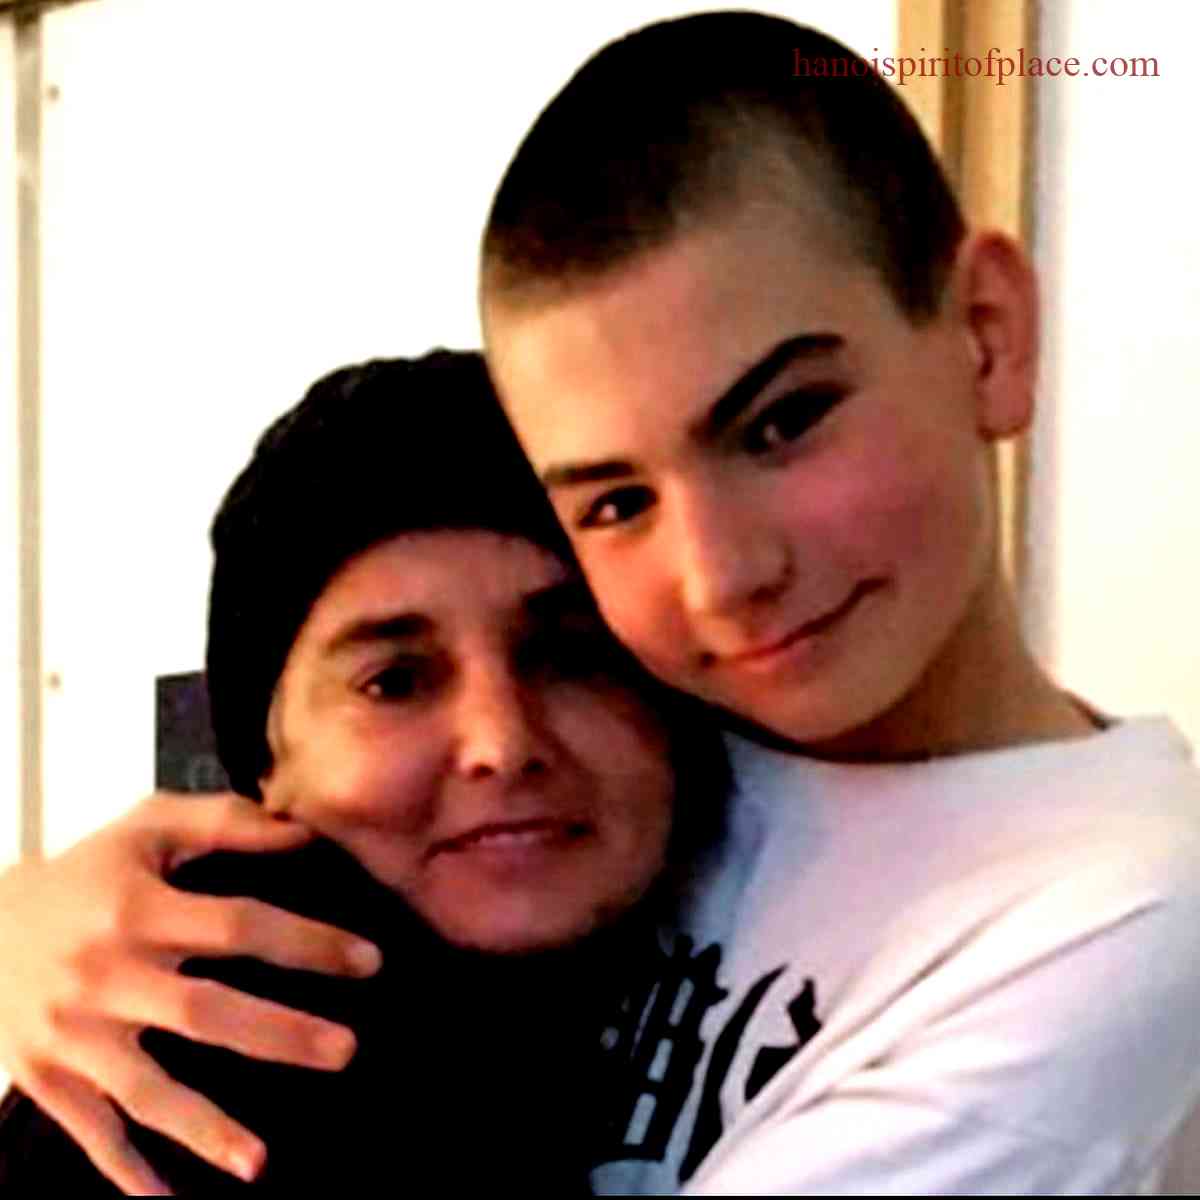 Remembering Sinead O'Connor: An Irish Musical Icon